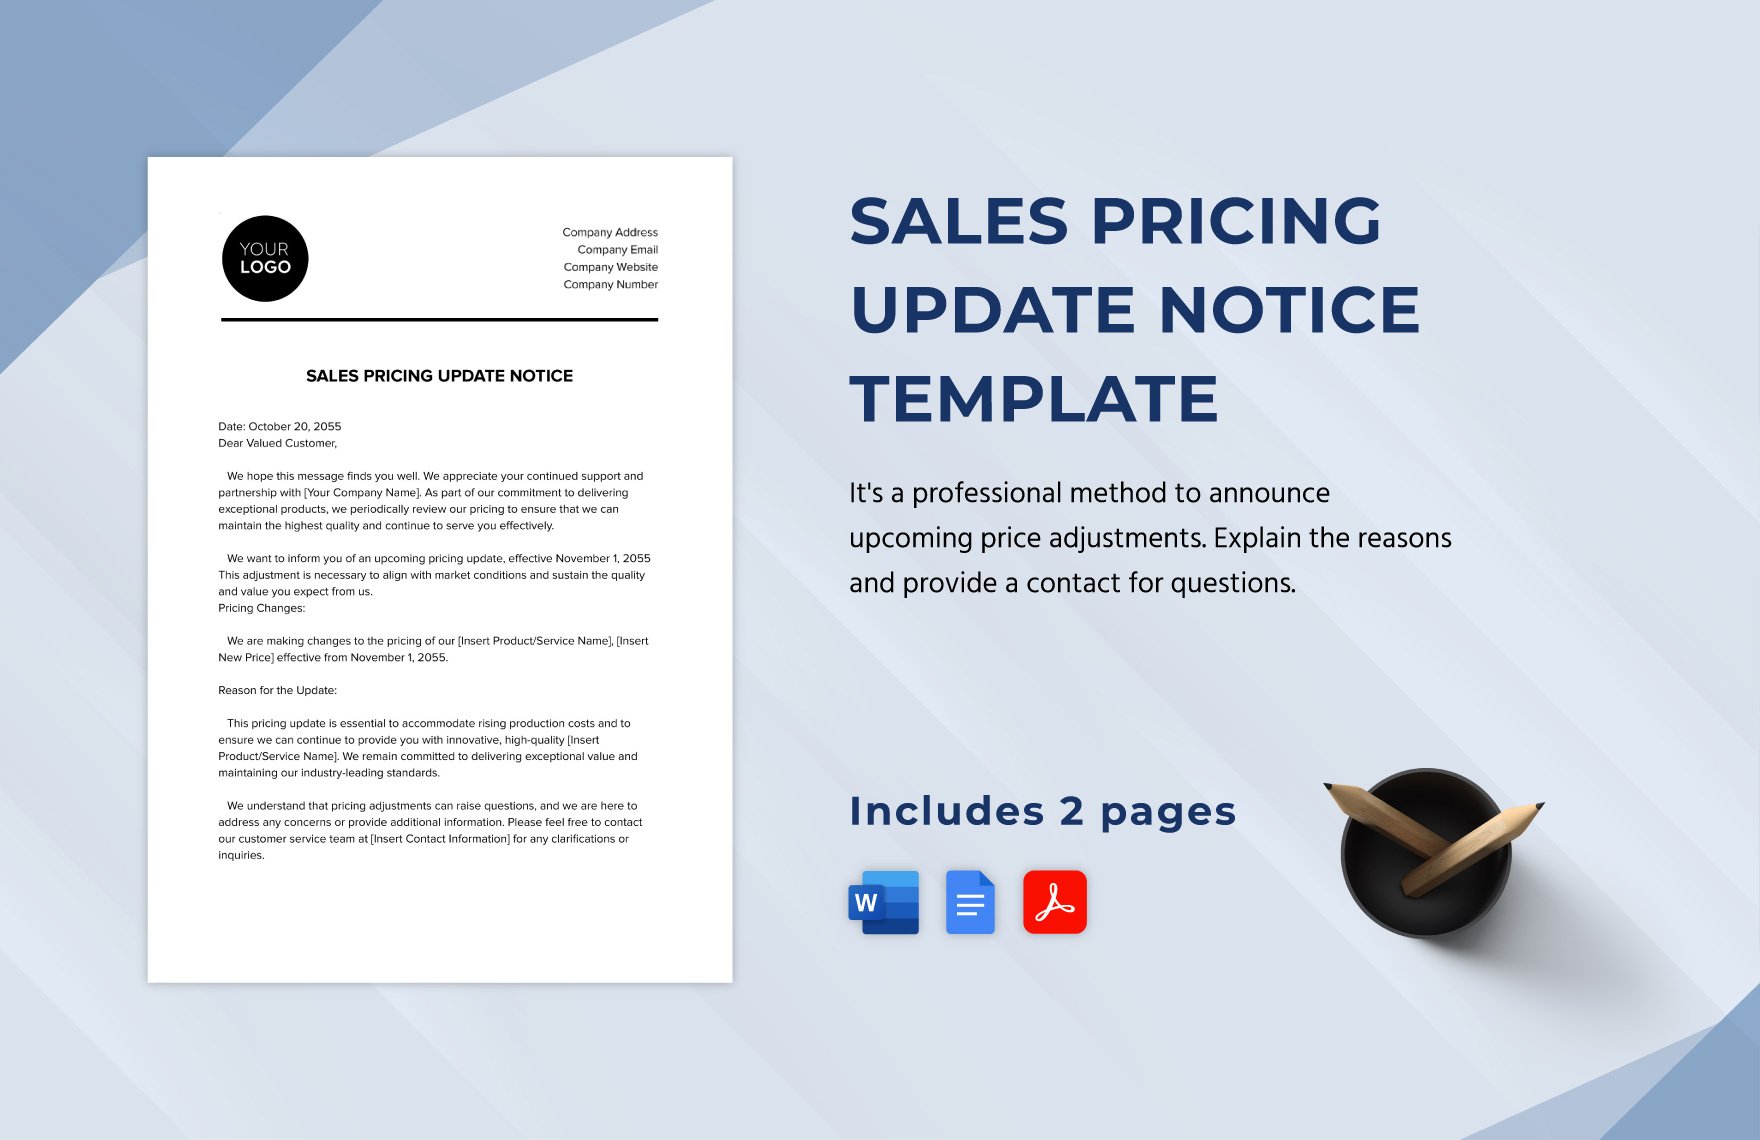 Sales Pricing Update Notice Template in Word, Google Docs, PDF